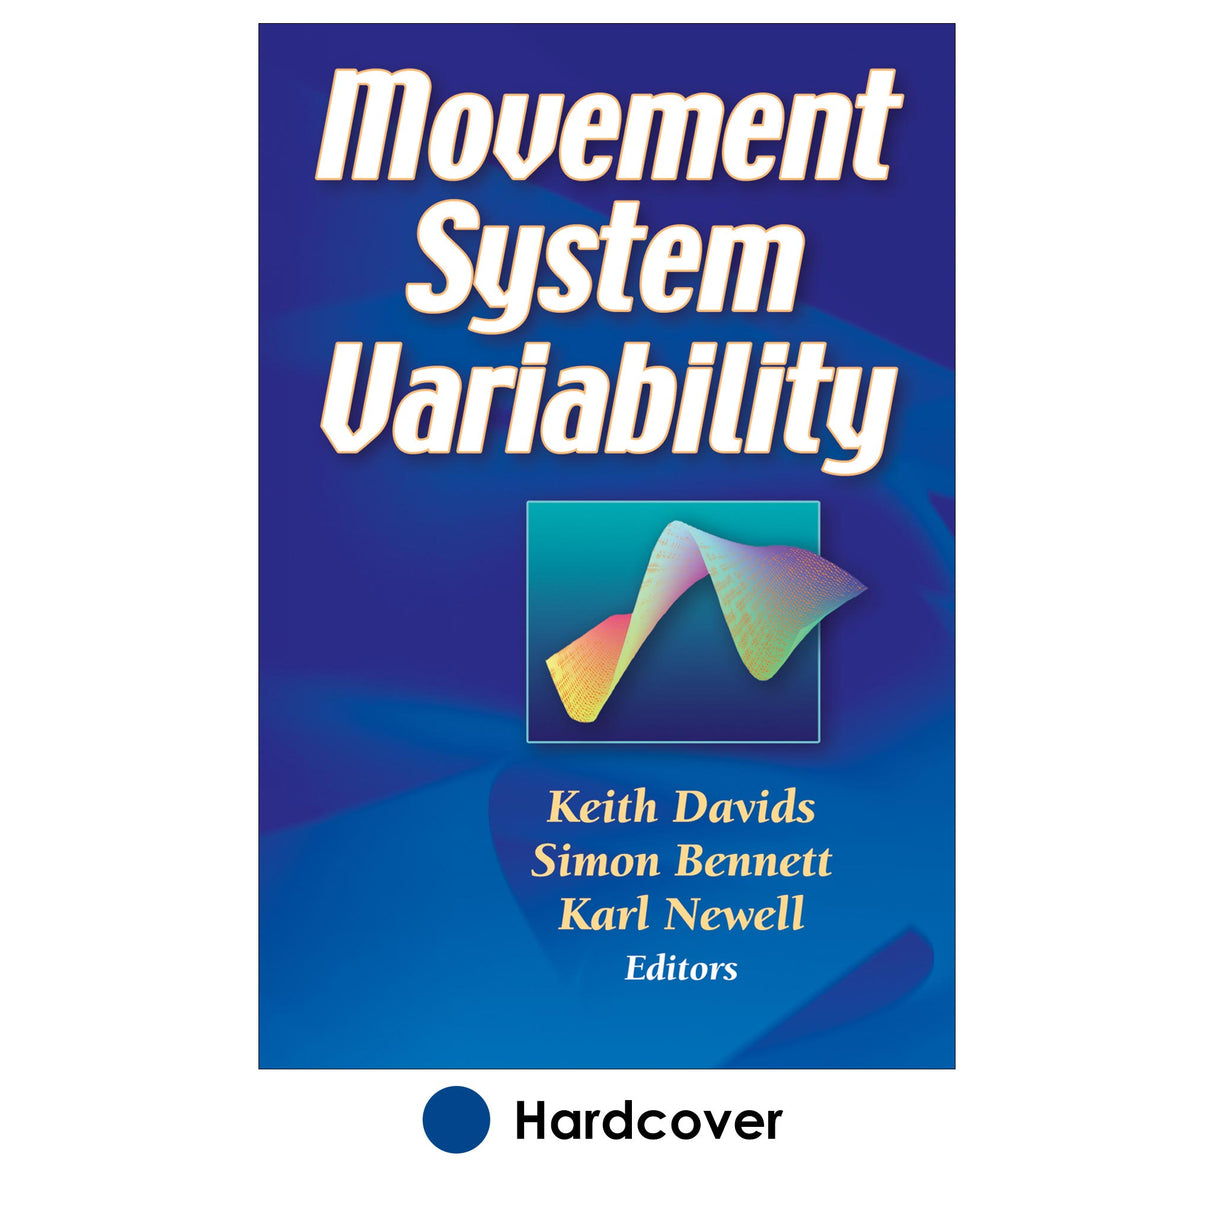 Movement System Variability